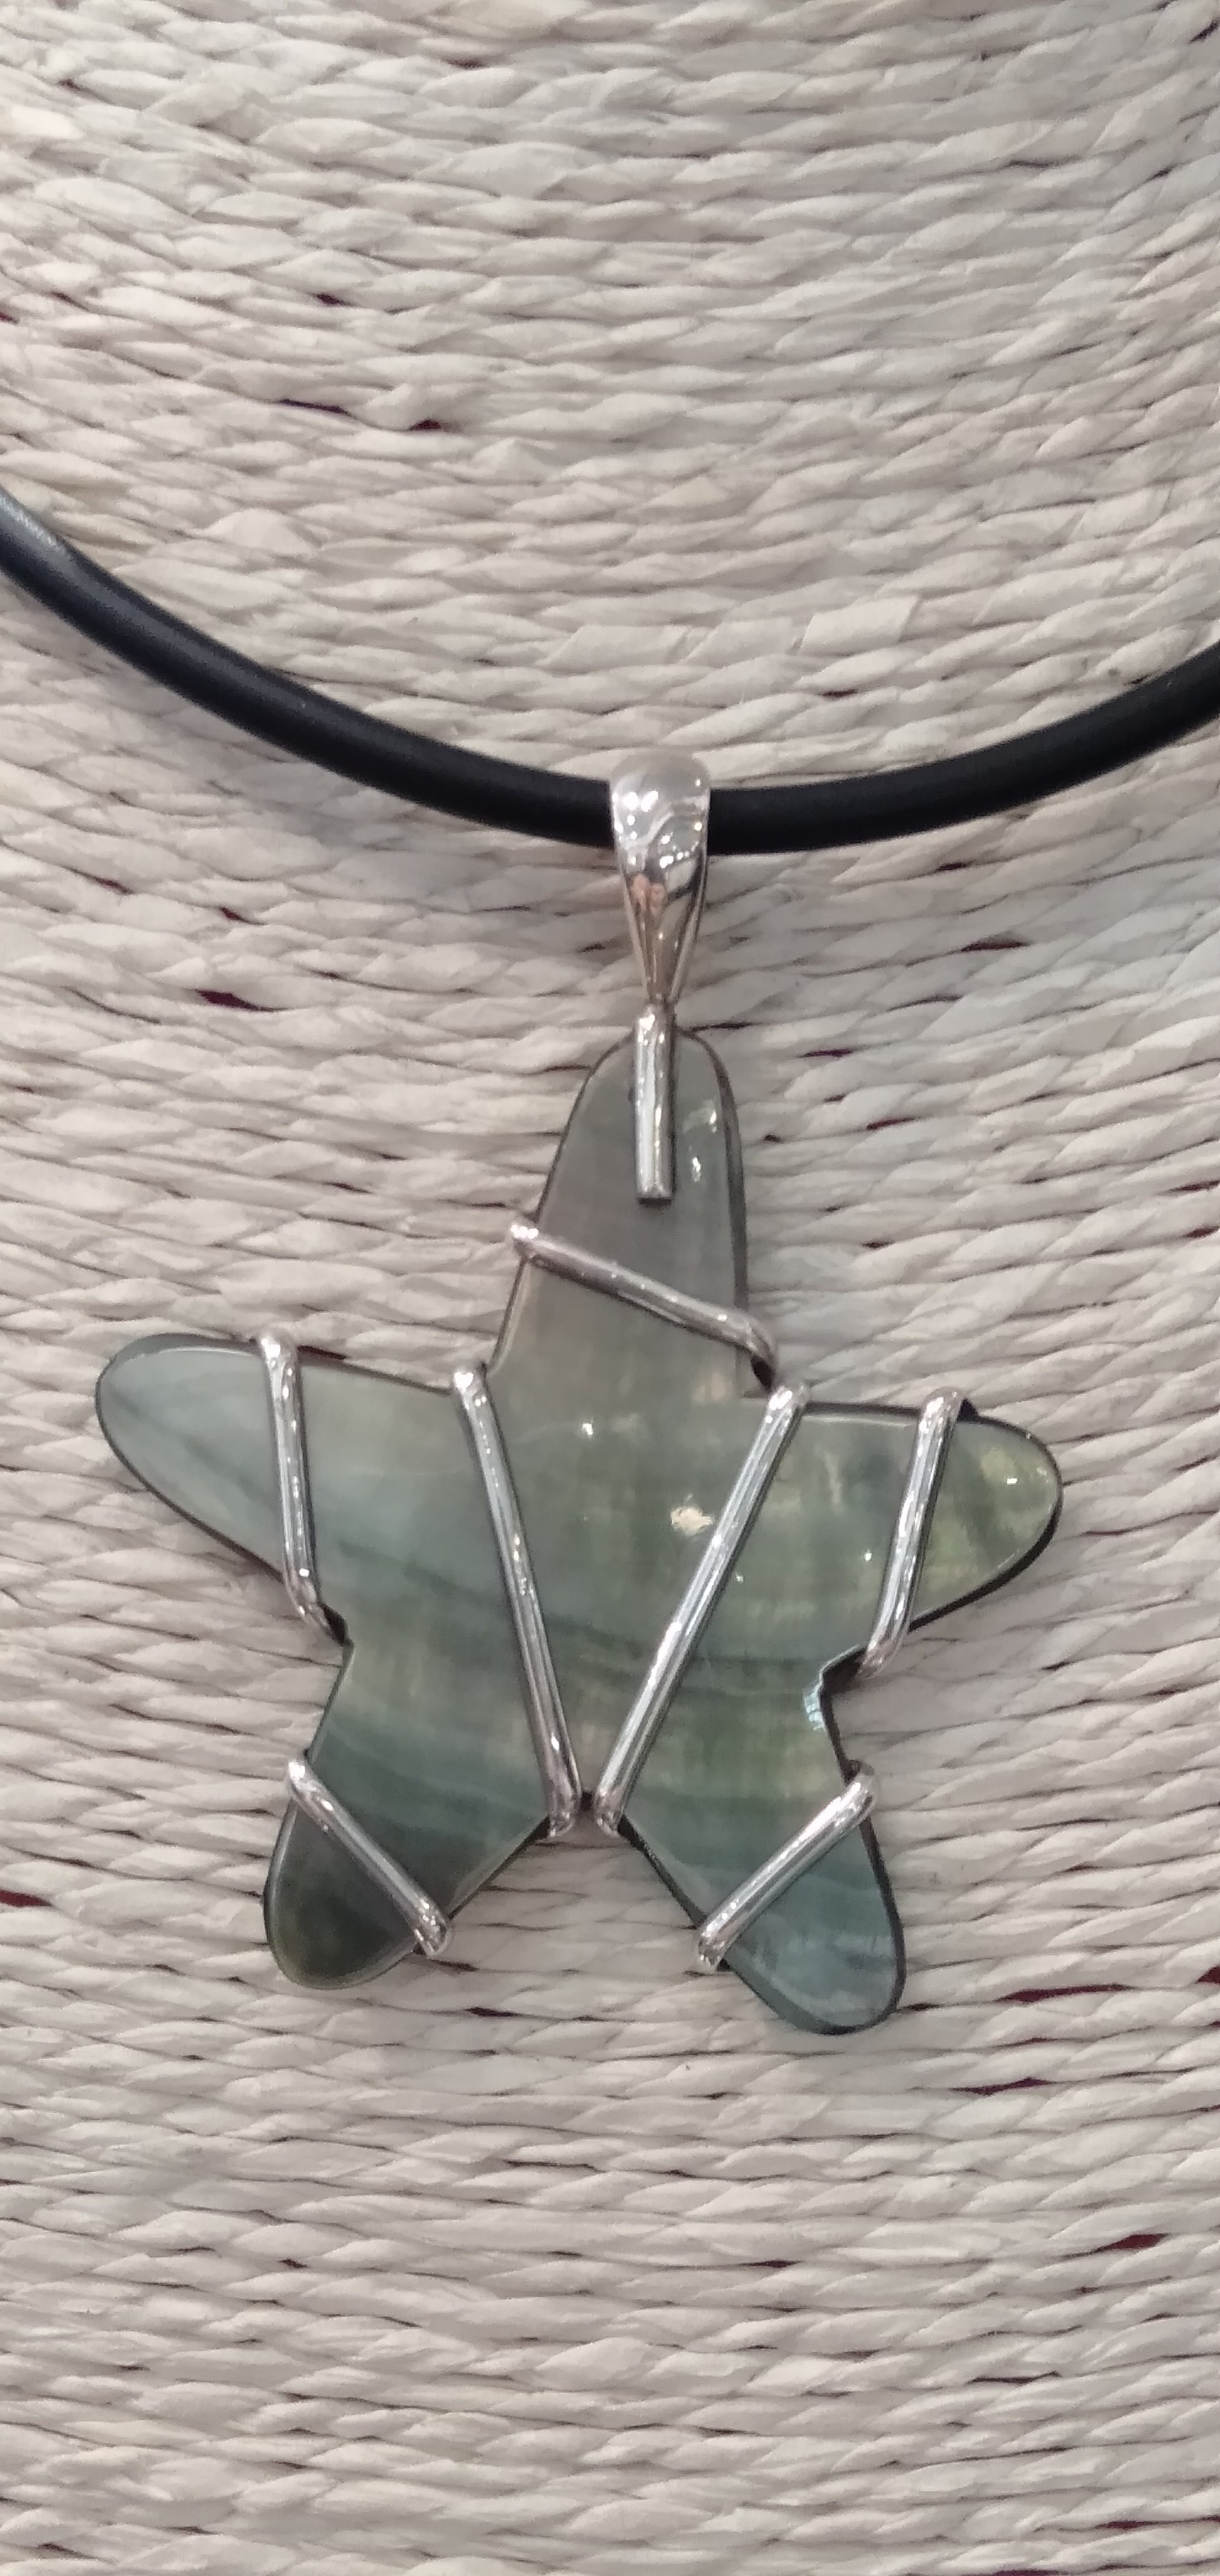 Mother Of Pearl Black 'Star' Pendant from Pacific Jewel - Southern Paua New Zealand